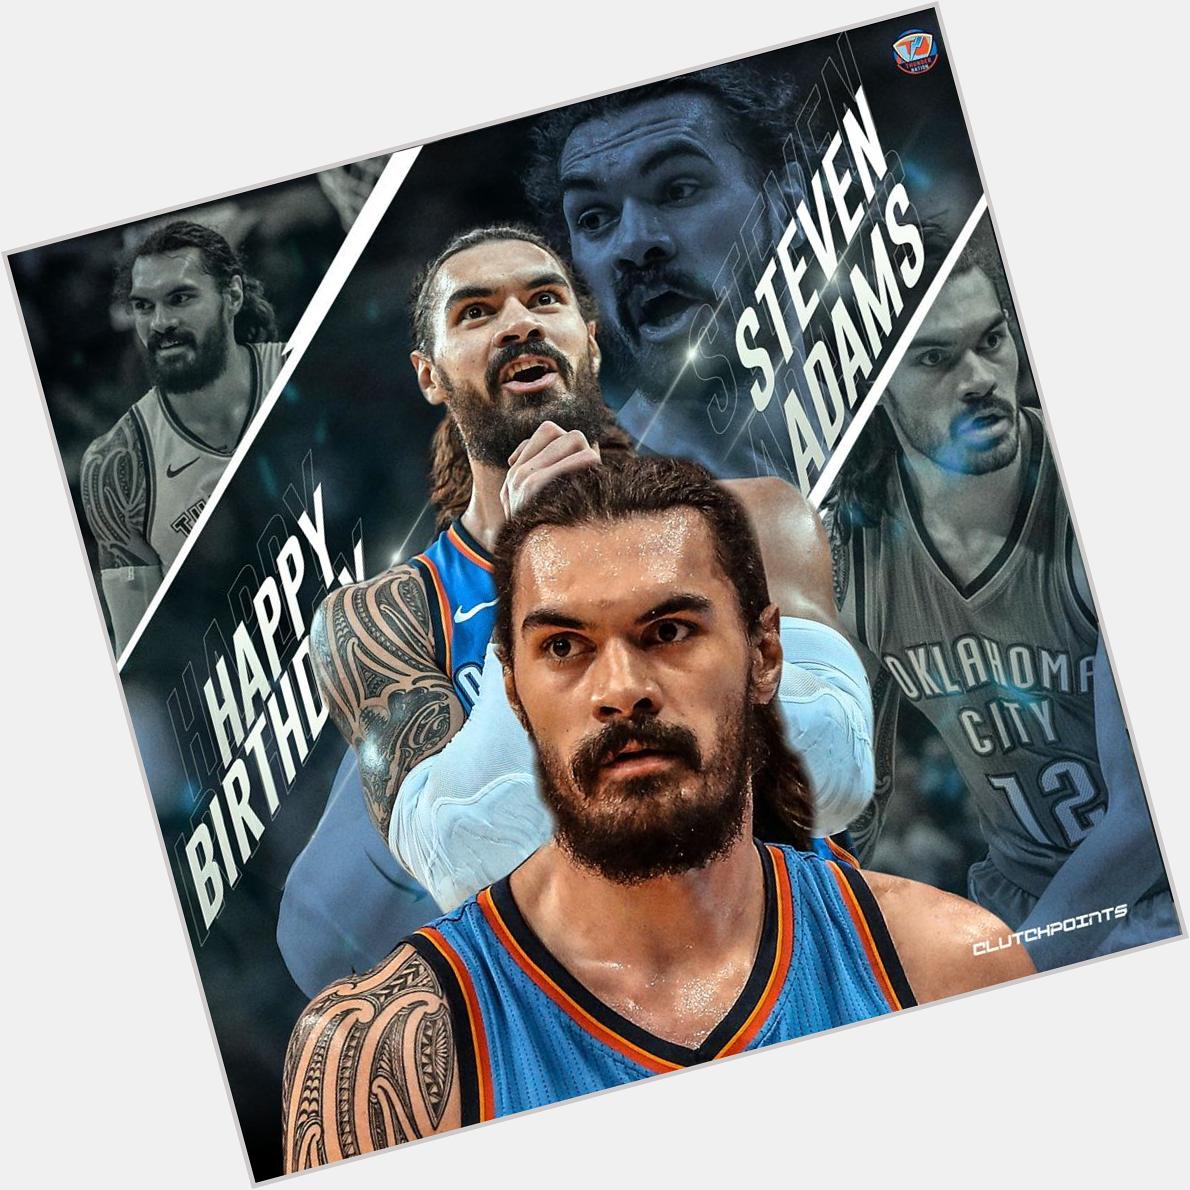 Join Thunder Nation in wishing Steven Adams a happy 26th birthday   